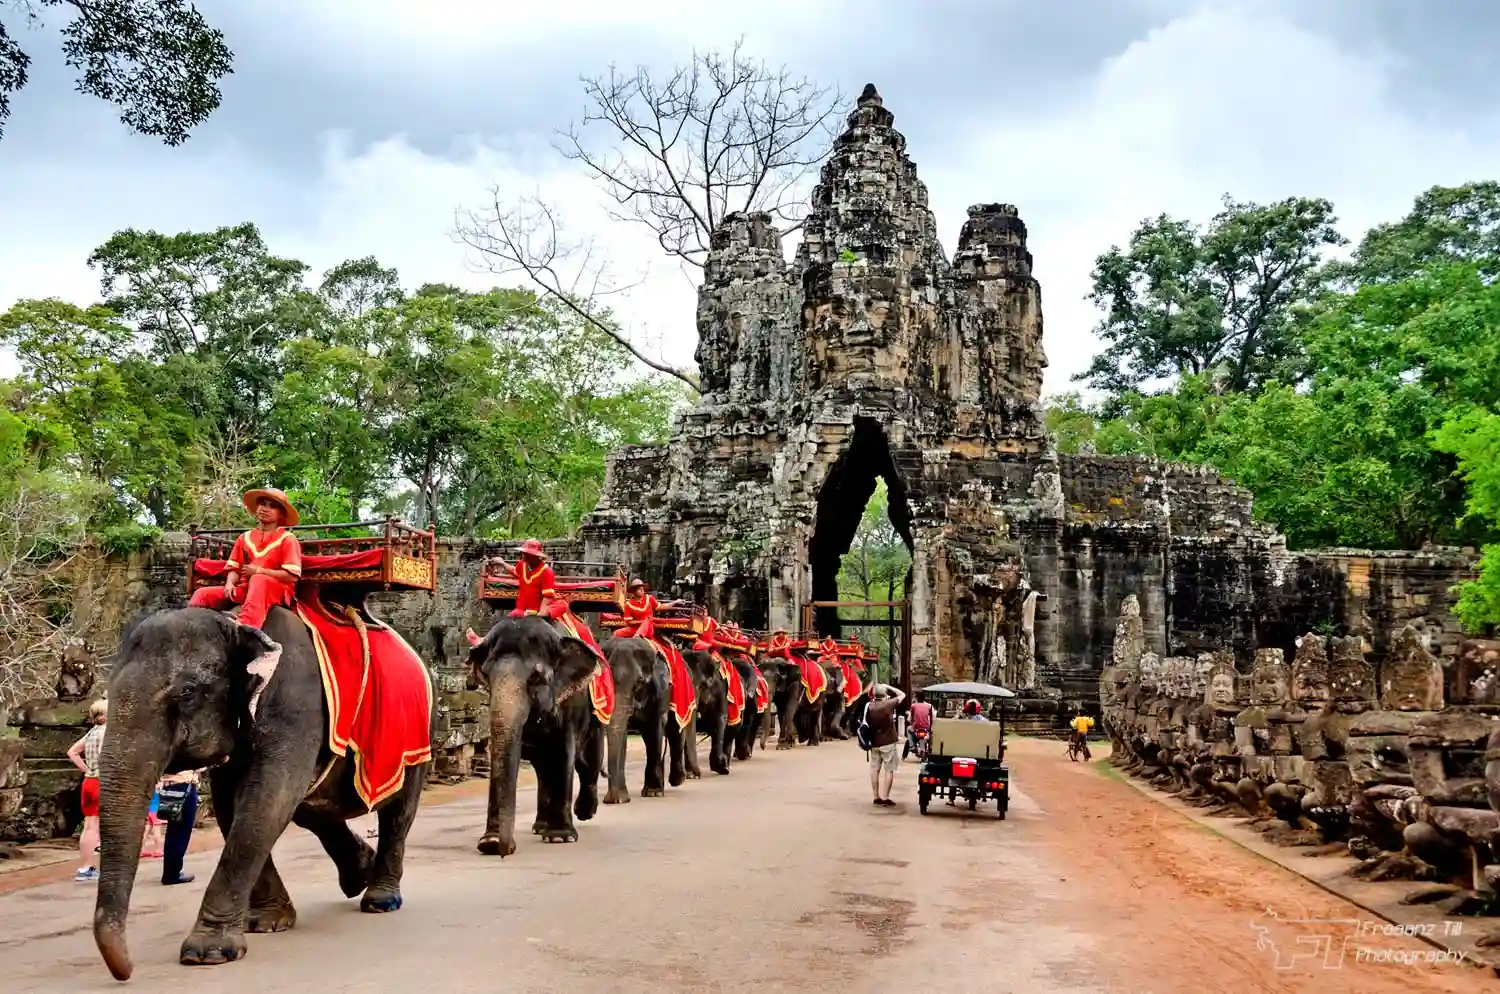 Cambodia Tour Siem Reap, Cambodia Tourism in Cambodia cheapest places to travel when you’re young and broke